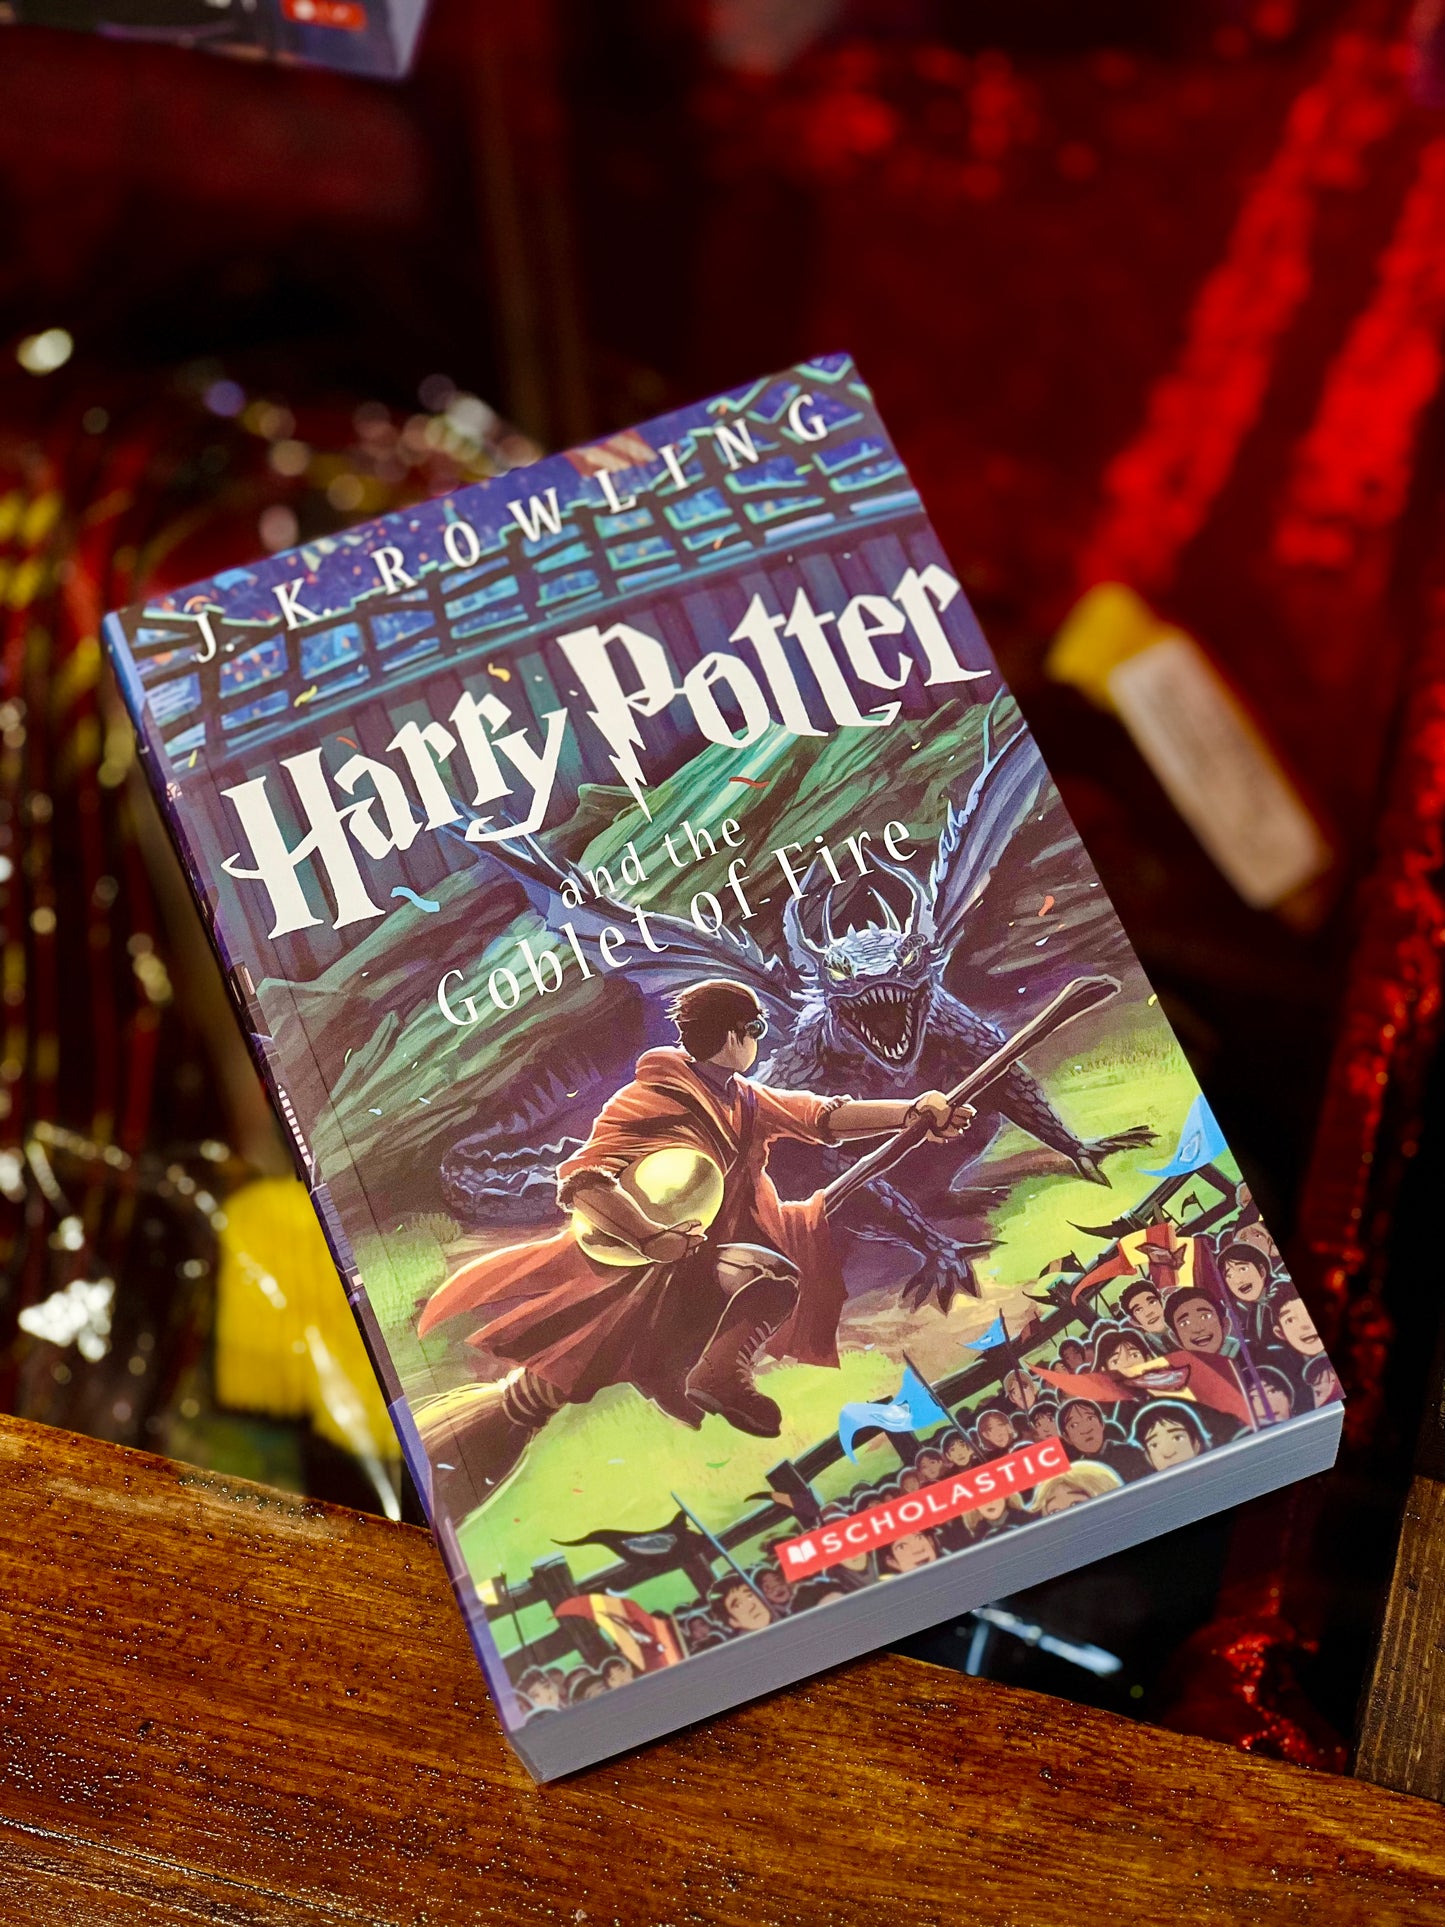 The full Harry Potter edition in English